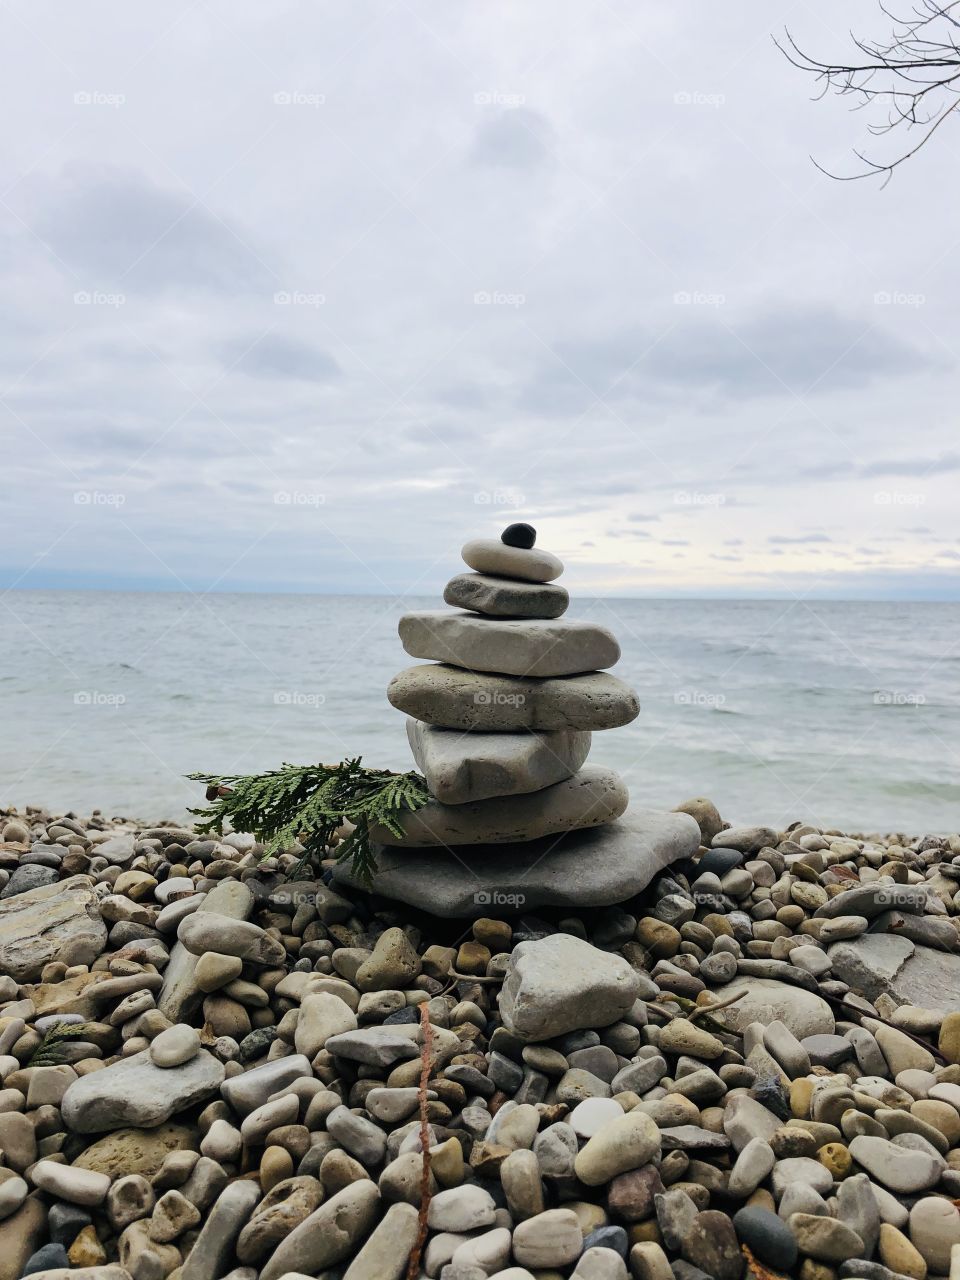 This cairn will lead you to the magnificent Lake Michigan bay if you are hiking in Peninsula State Park in Door County, Wisconsin.